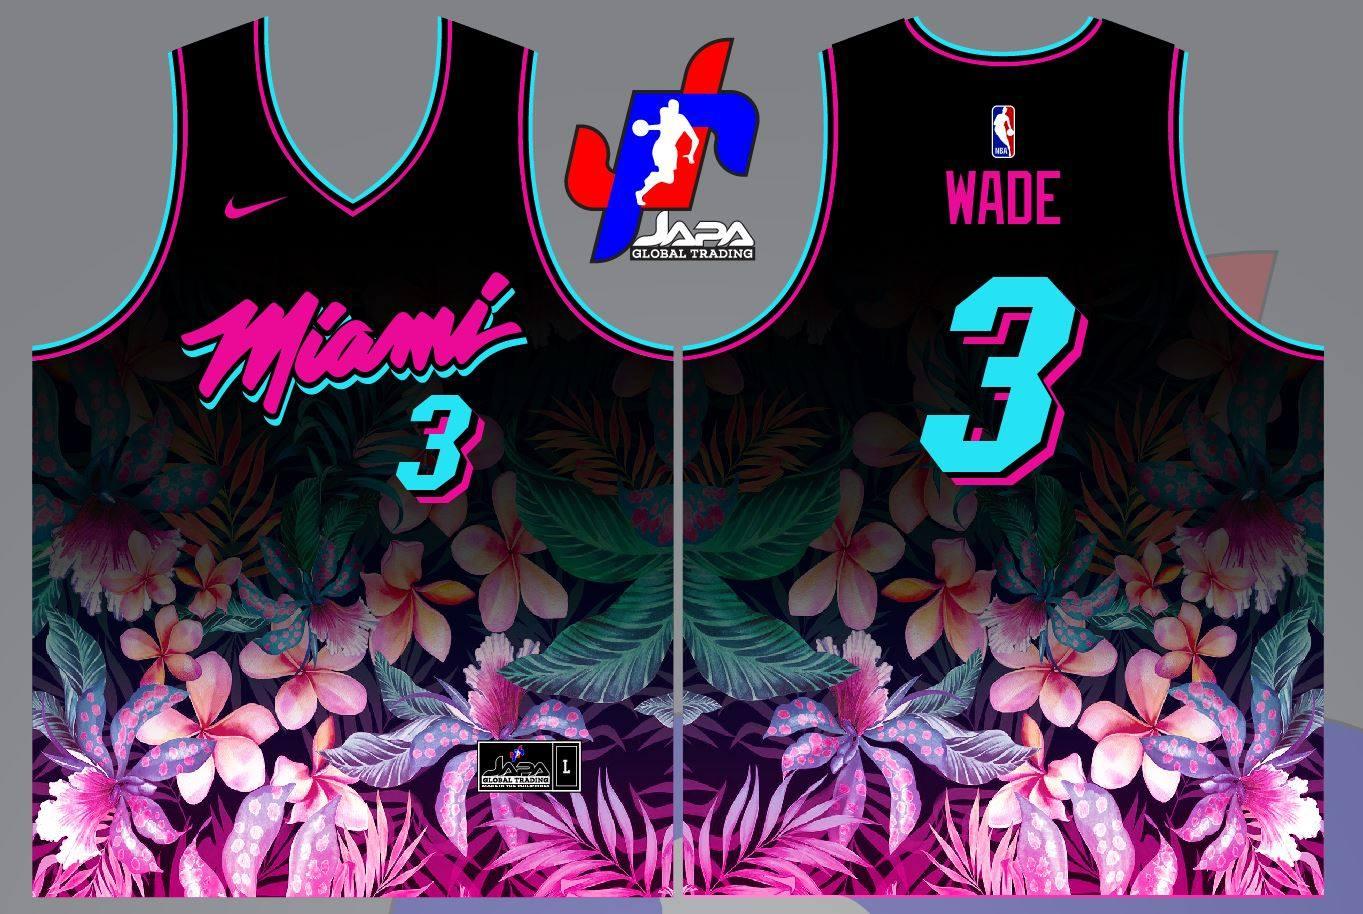 pink sublimation basketball jersey